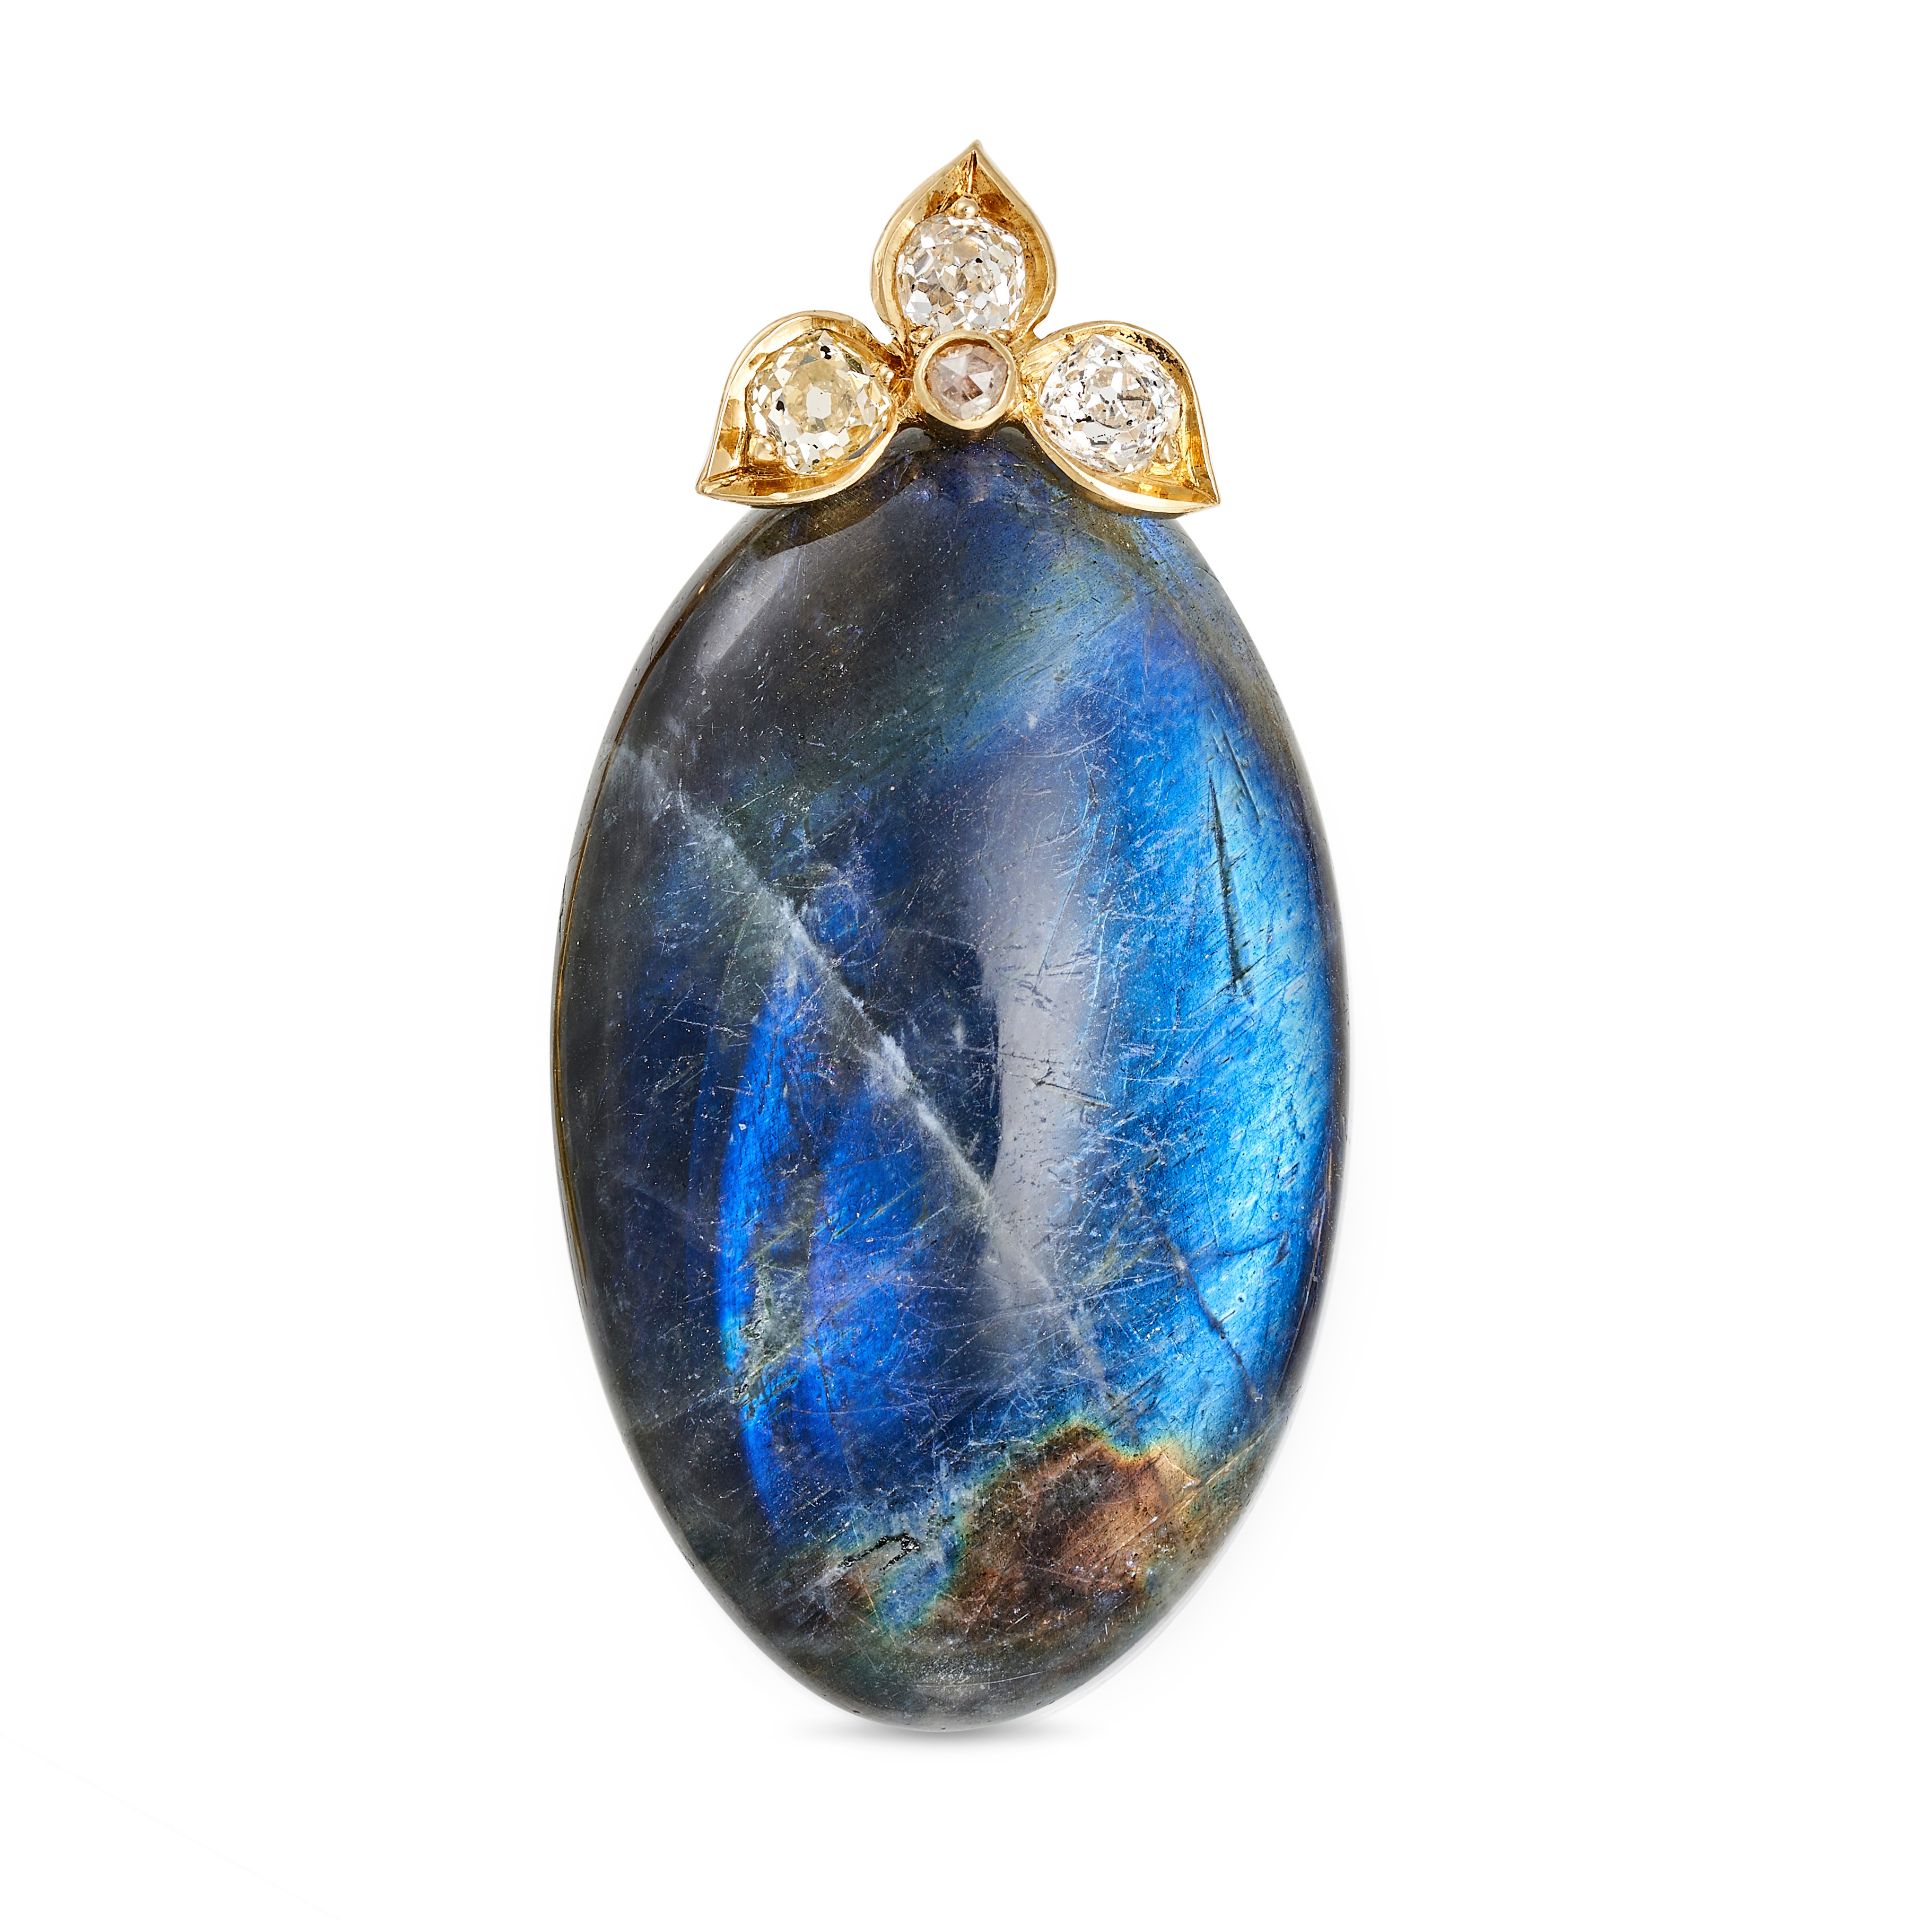 A LABRADORITE AND DIAMOND PENDANT in yellow gold, set with an oval polished labradorite accented ...